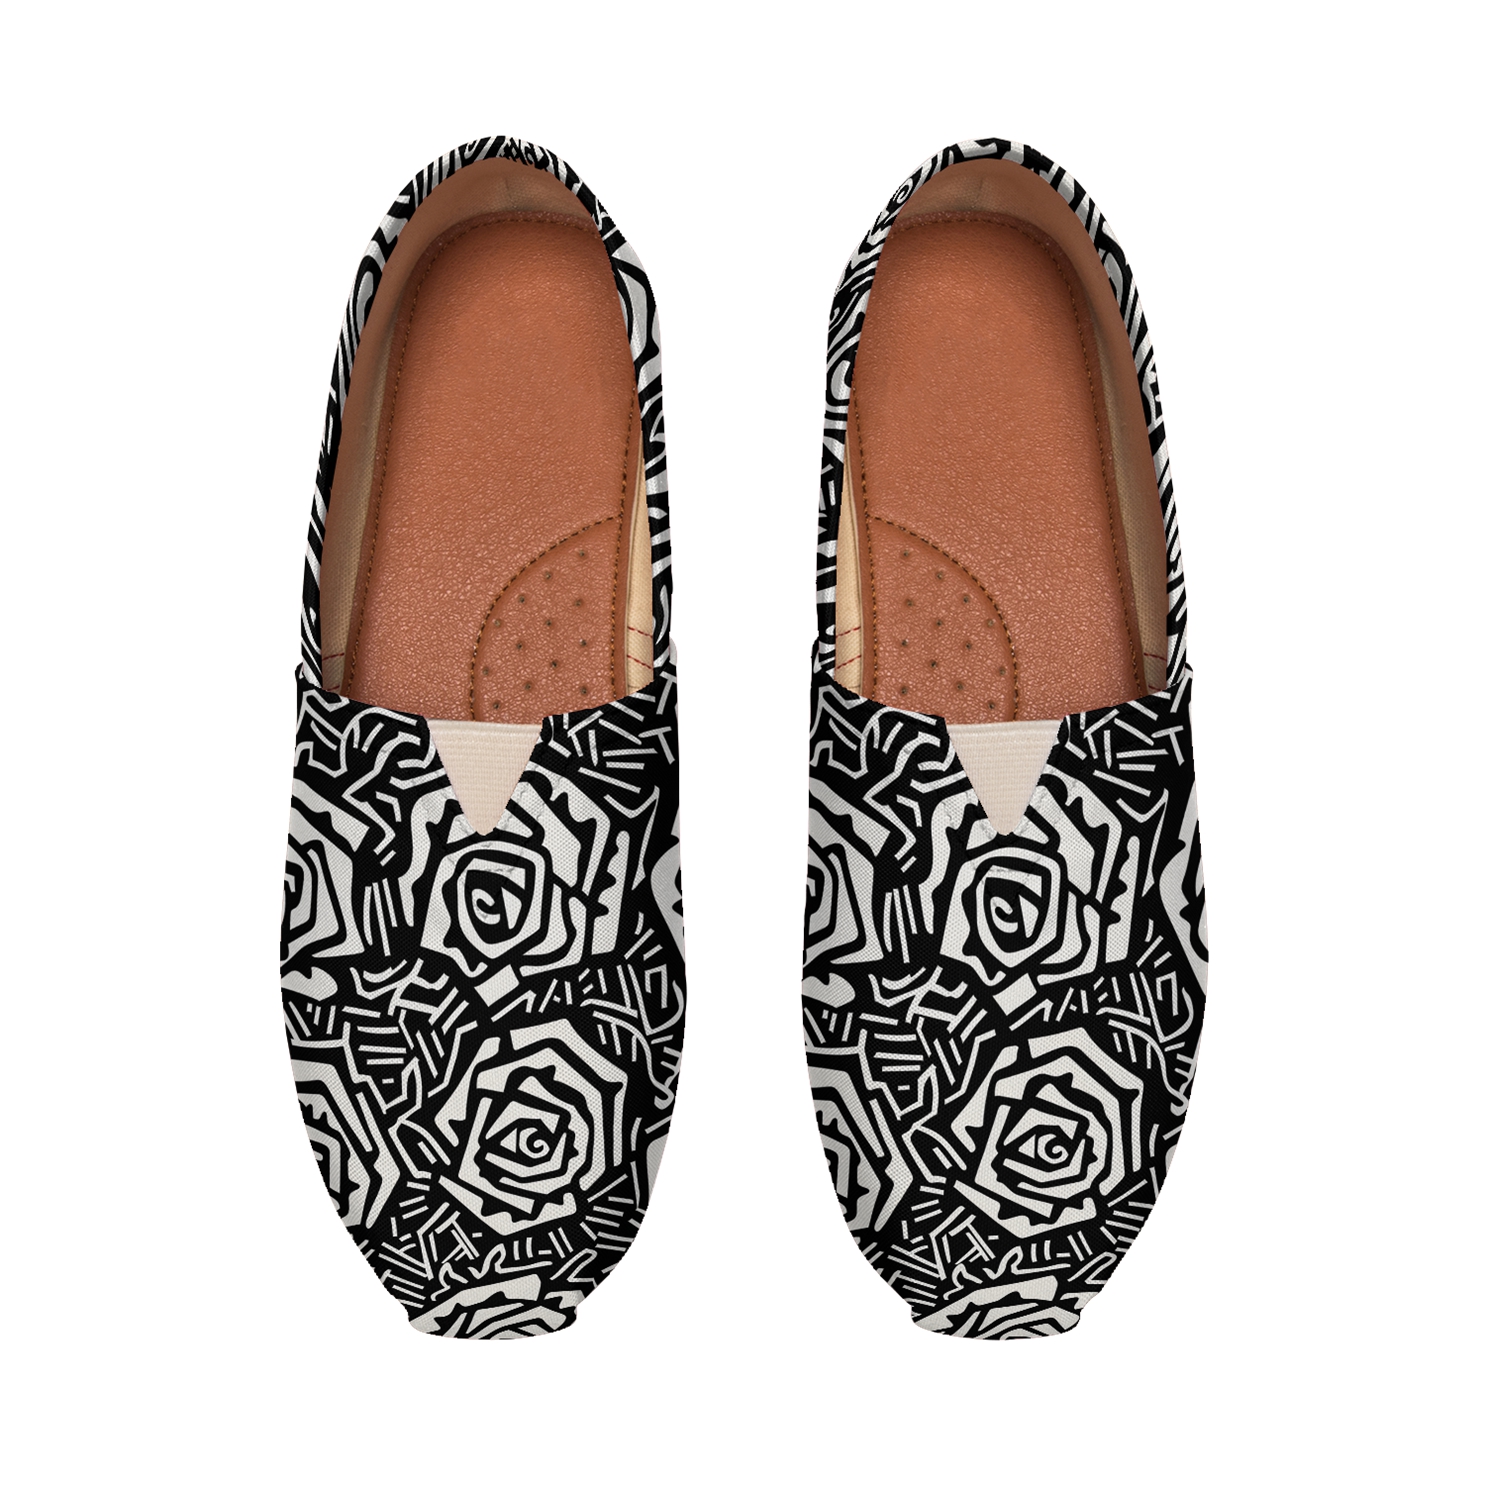 Women's fashion black and white rose painted printed flat canvas slippers casual shoes lightweight and comfortable travel shoes